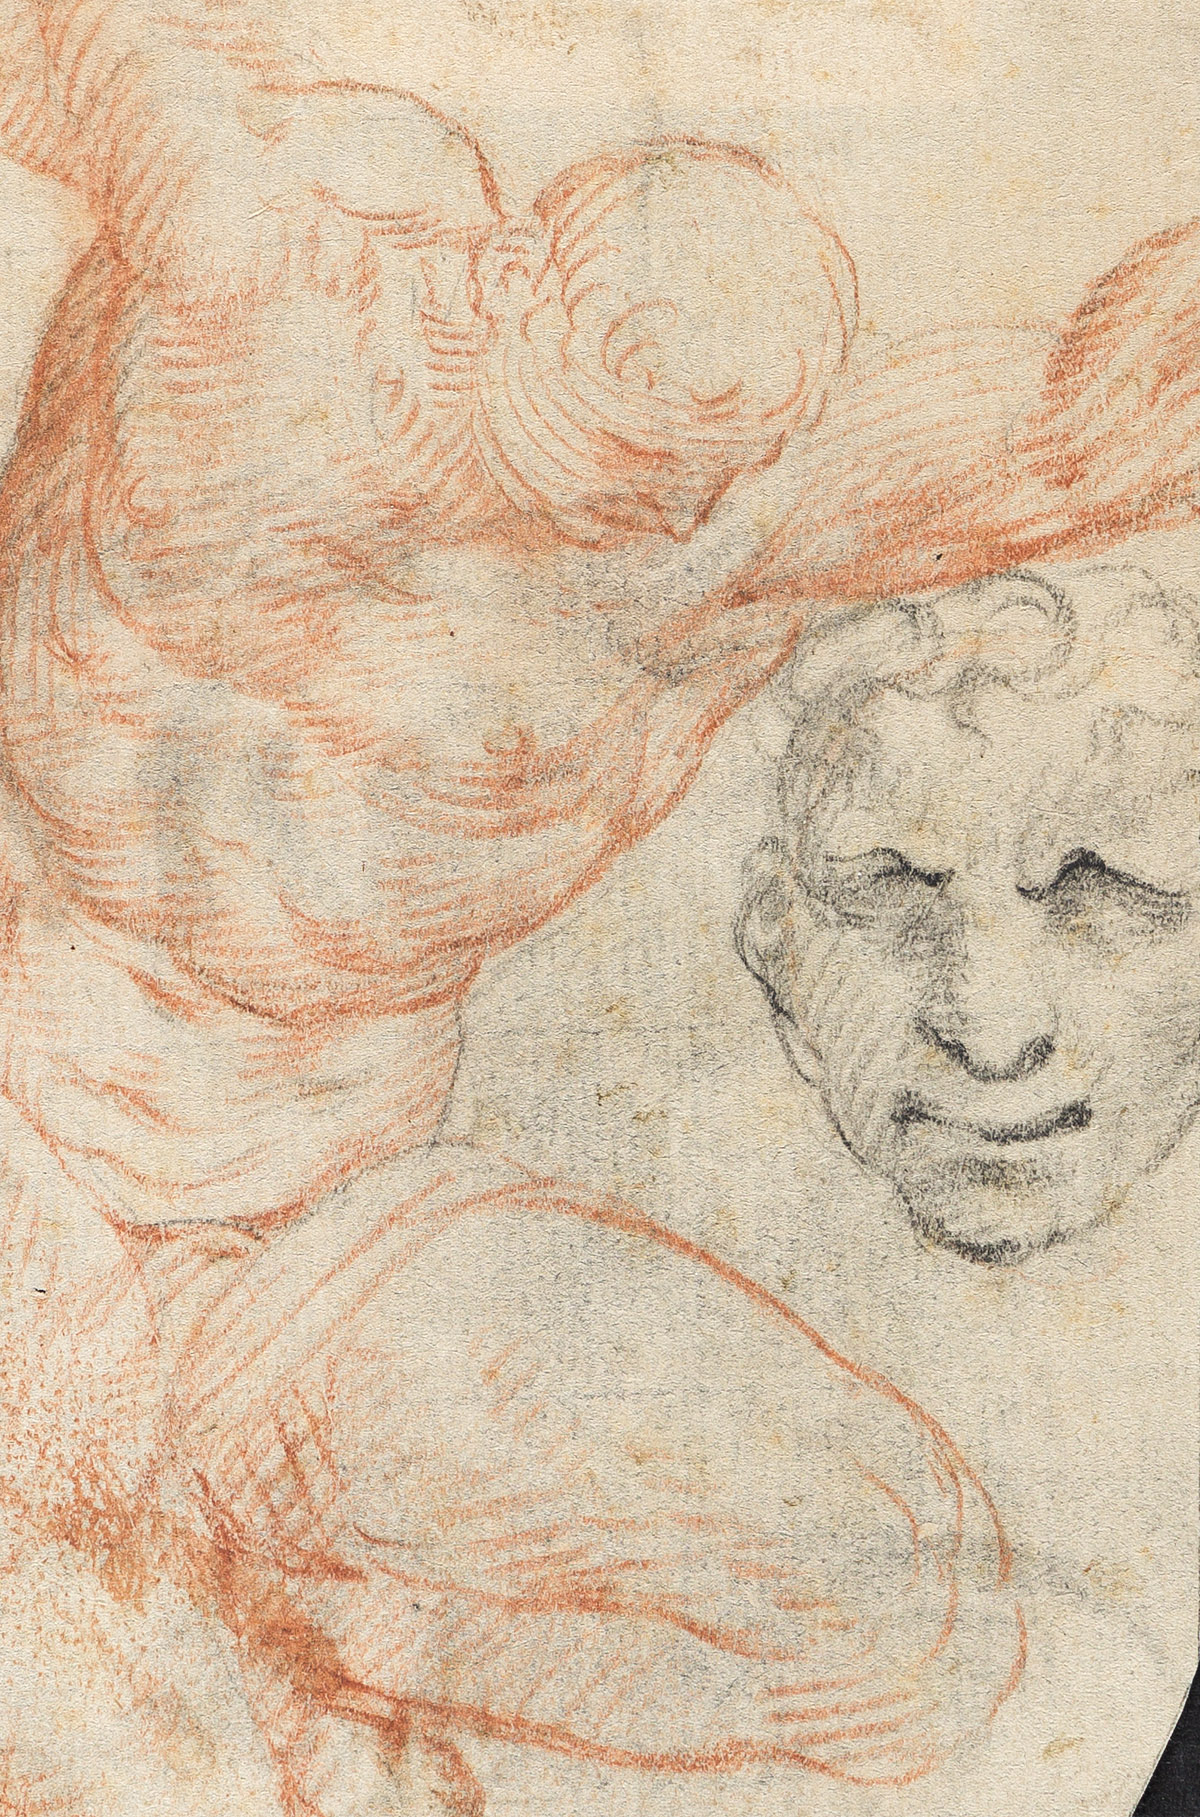 PELLEGRINO TIBALDI (CIRCLE OF) (Bologna 1527-1596 Milan) Sheet of Studies with a Kneeling Figure and a Male Head.